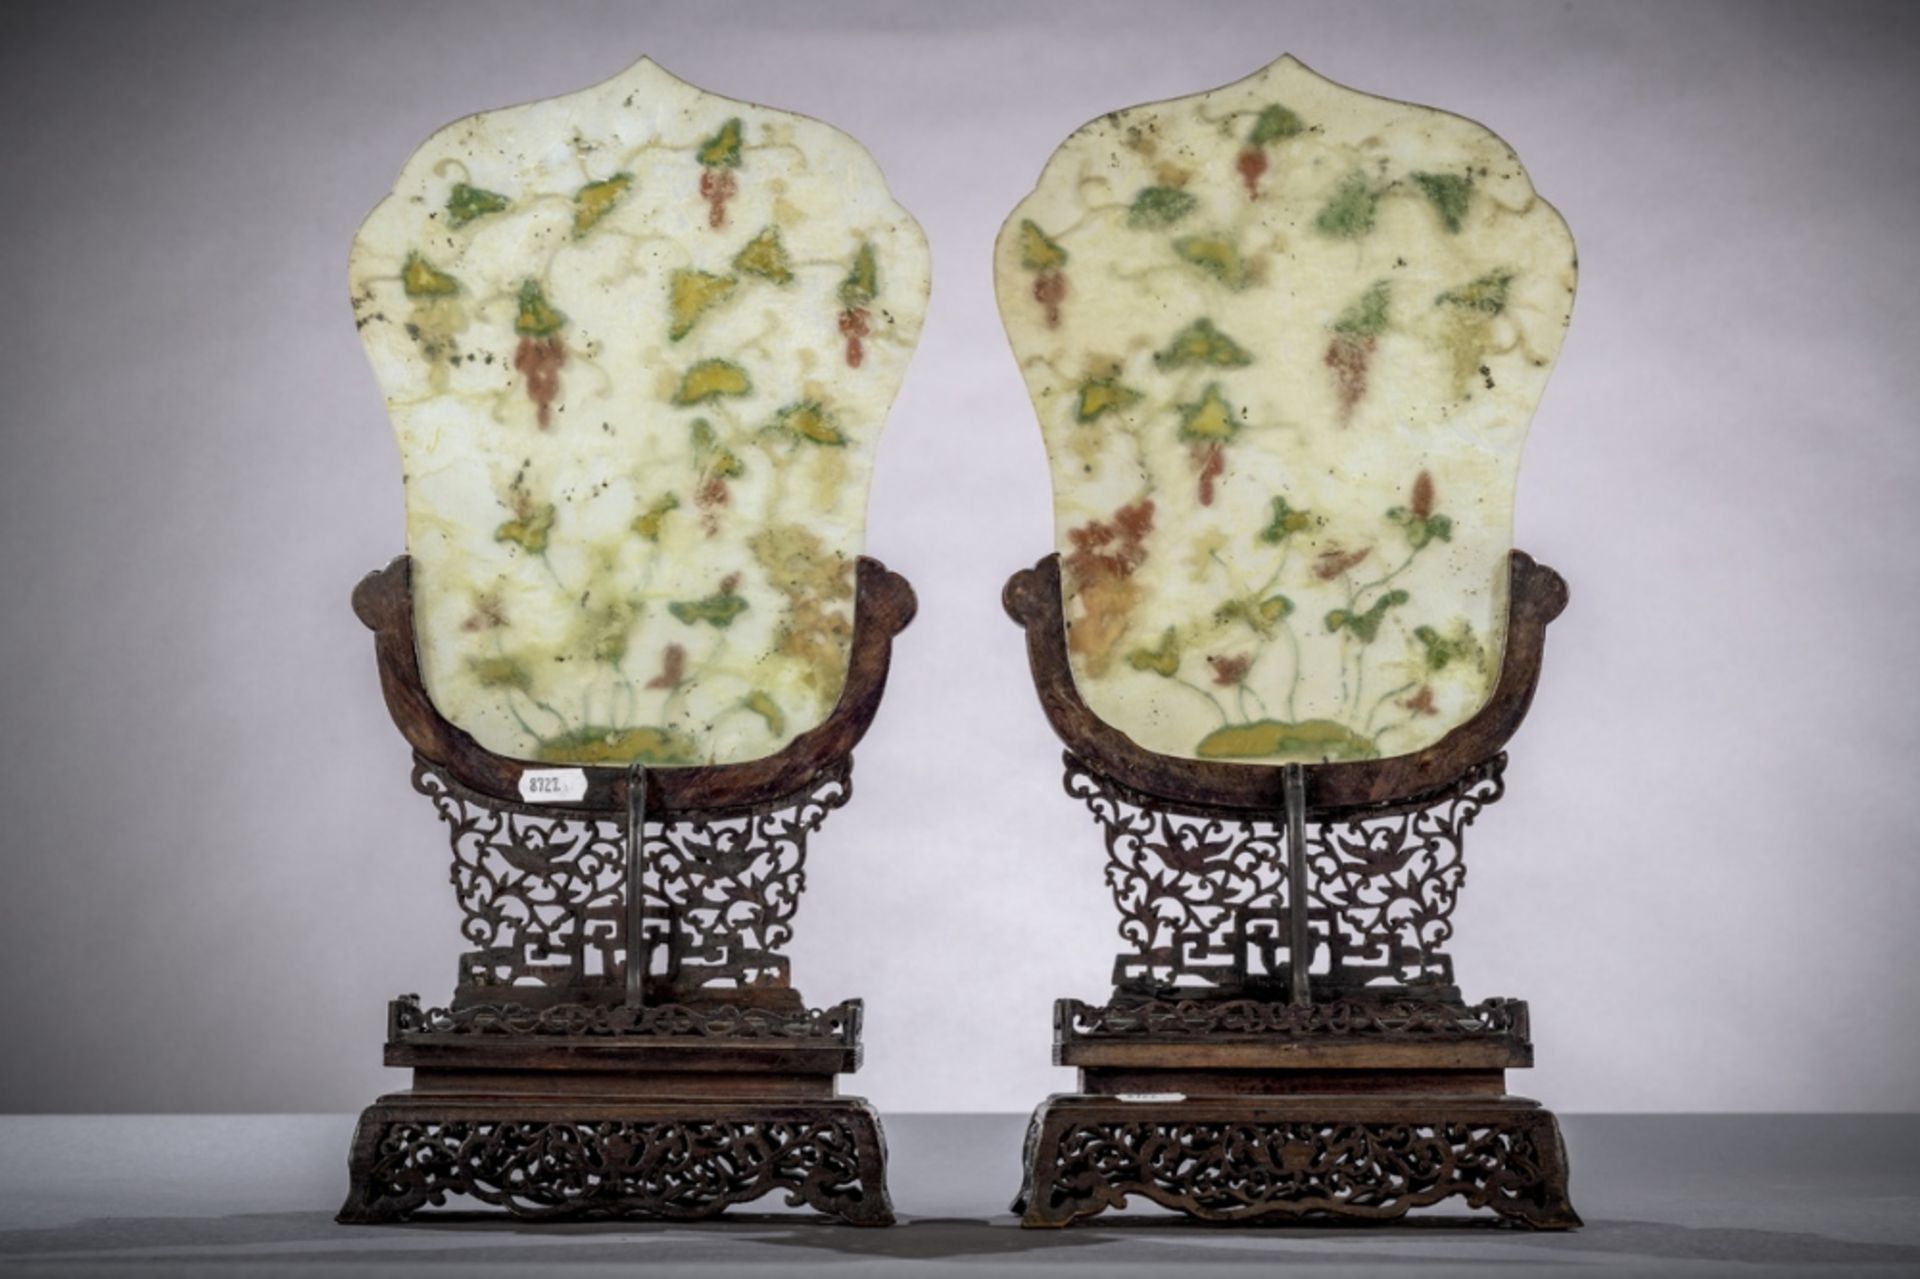 A pair of Chinese table screens with inlaywork on wooden pedestals (44x20x10 cm) (*) - Image 2 of 9